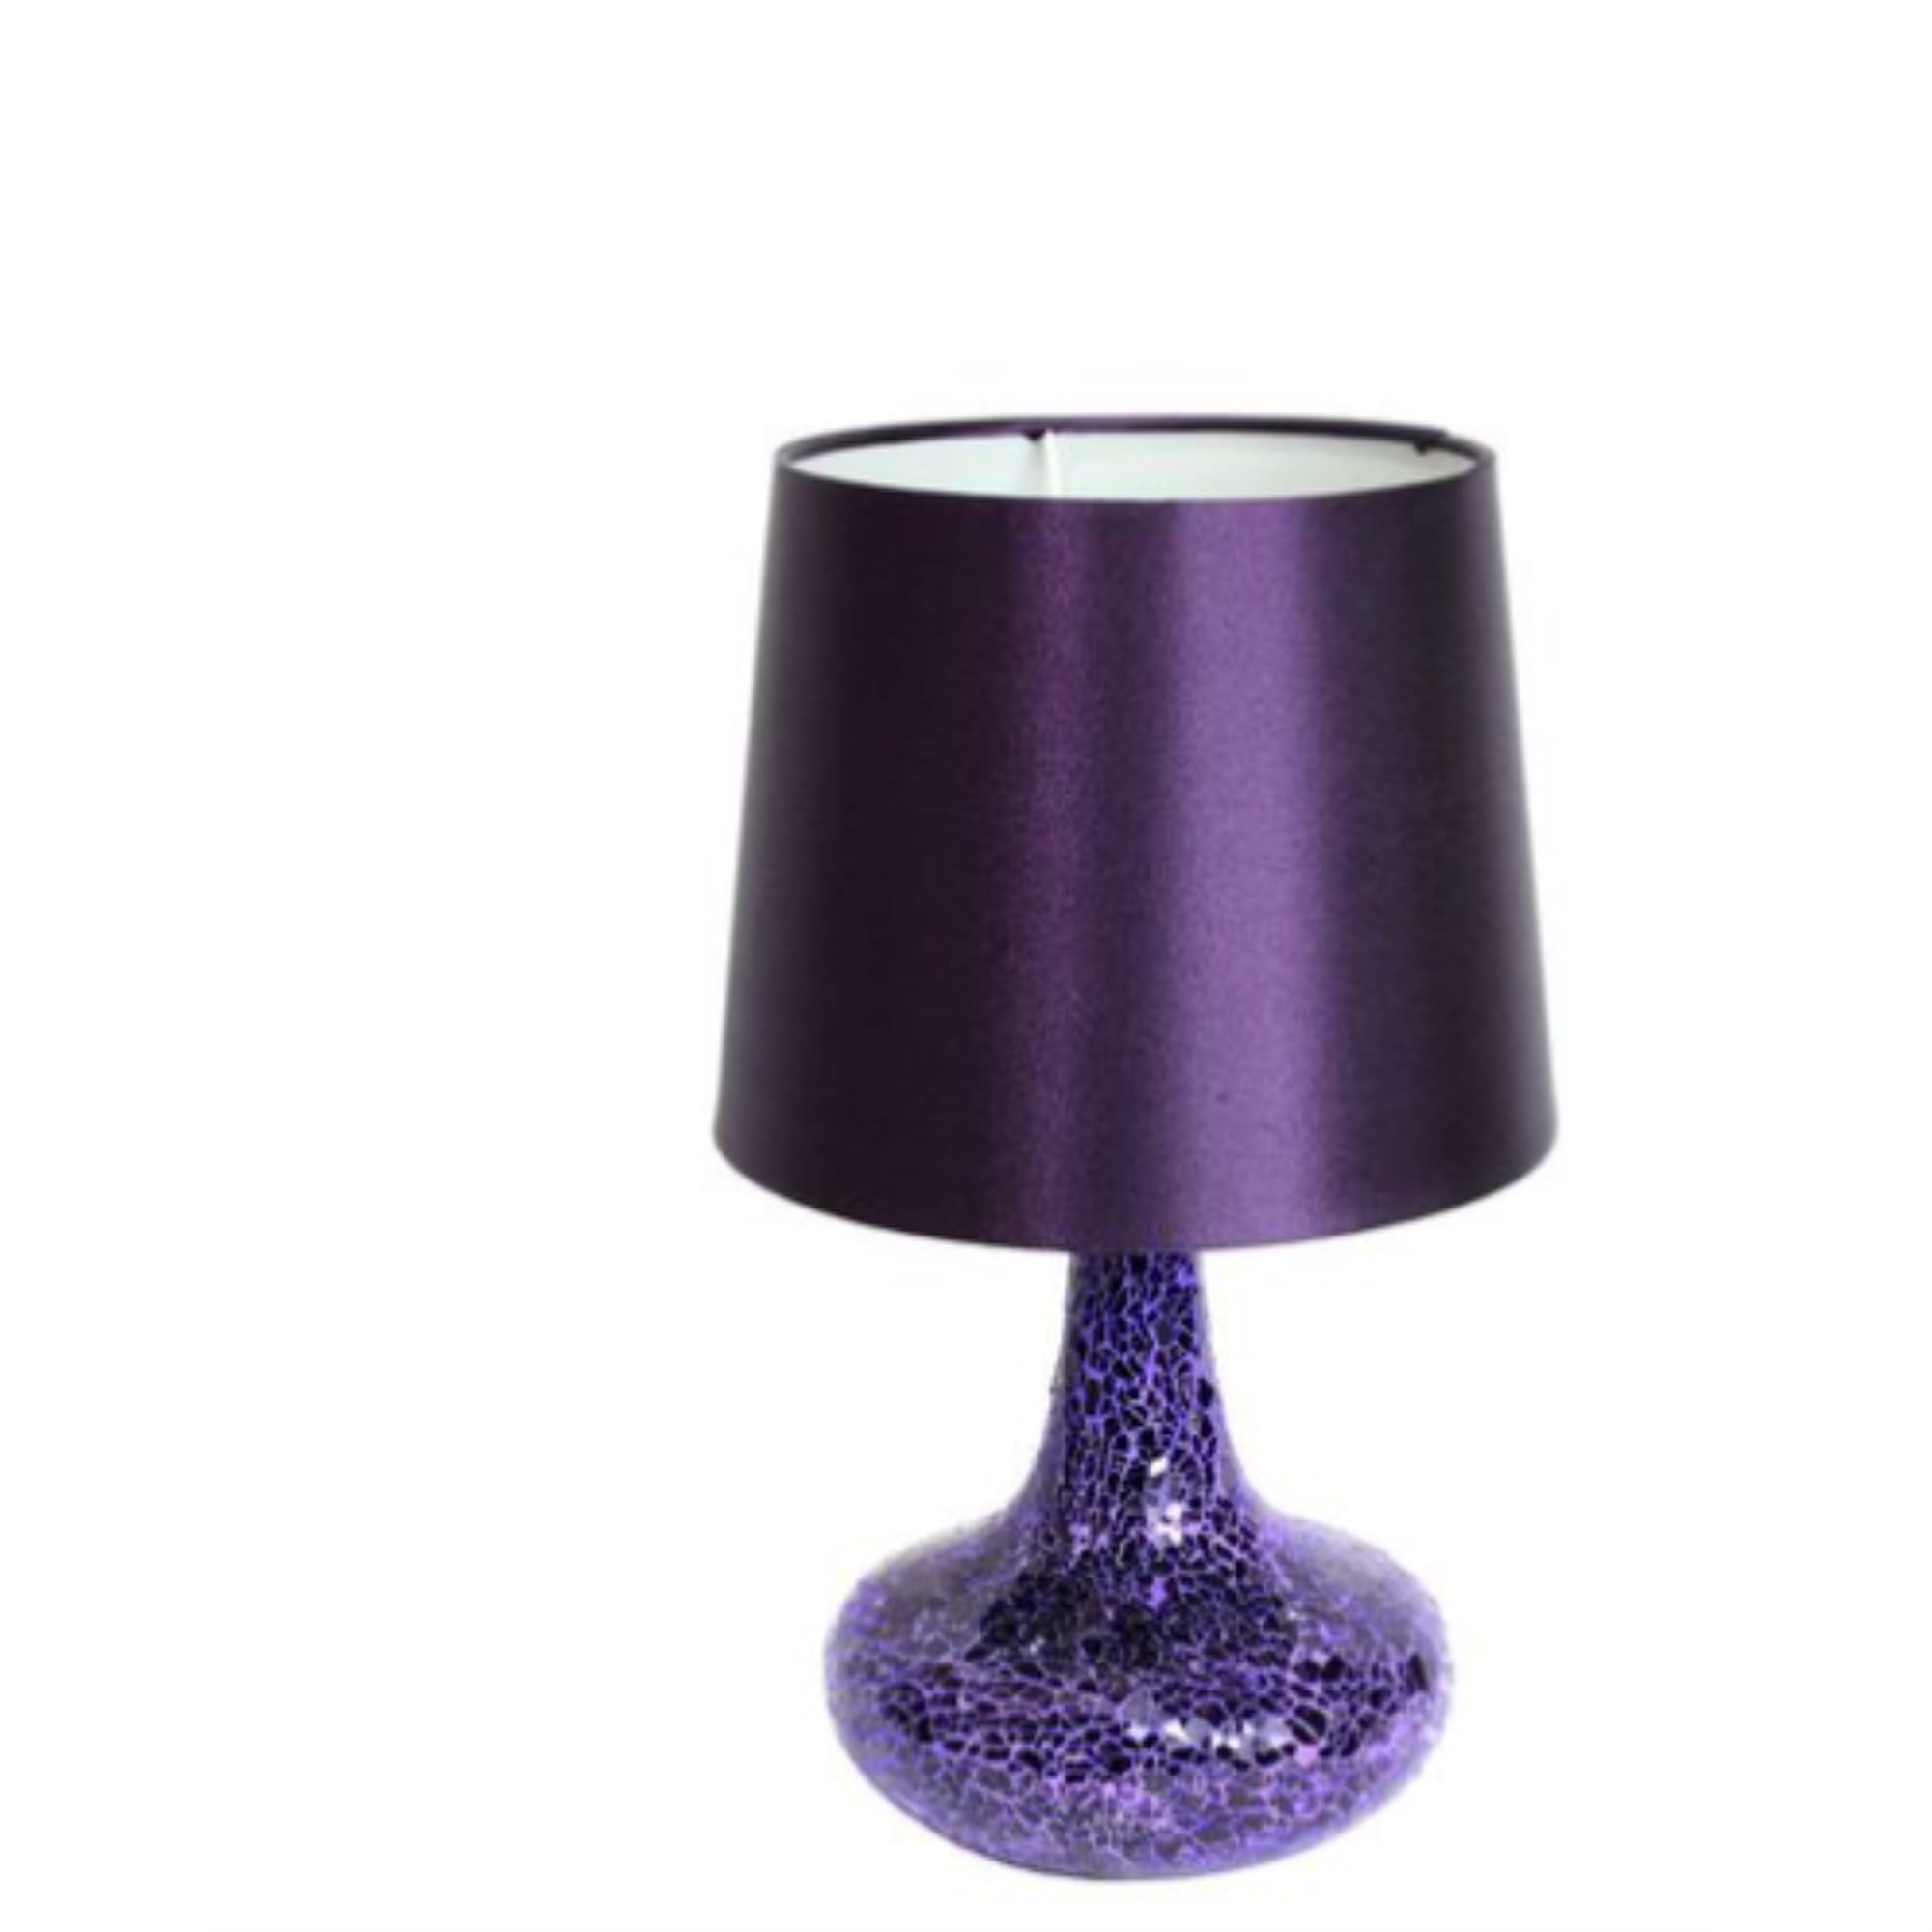 BEADED SHADE FOR WINDOW TABLE NIGHT LIGHT ELECTRIC CANDLE SHADE LILAC LAVENDER 